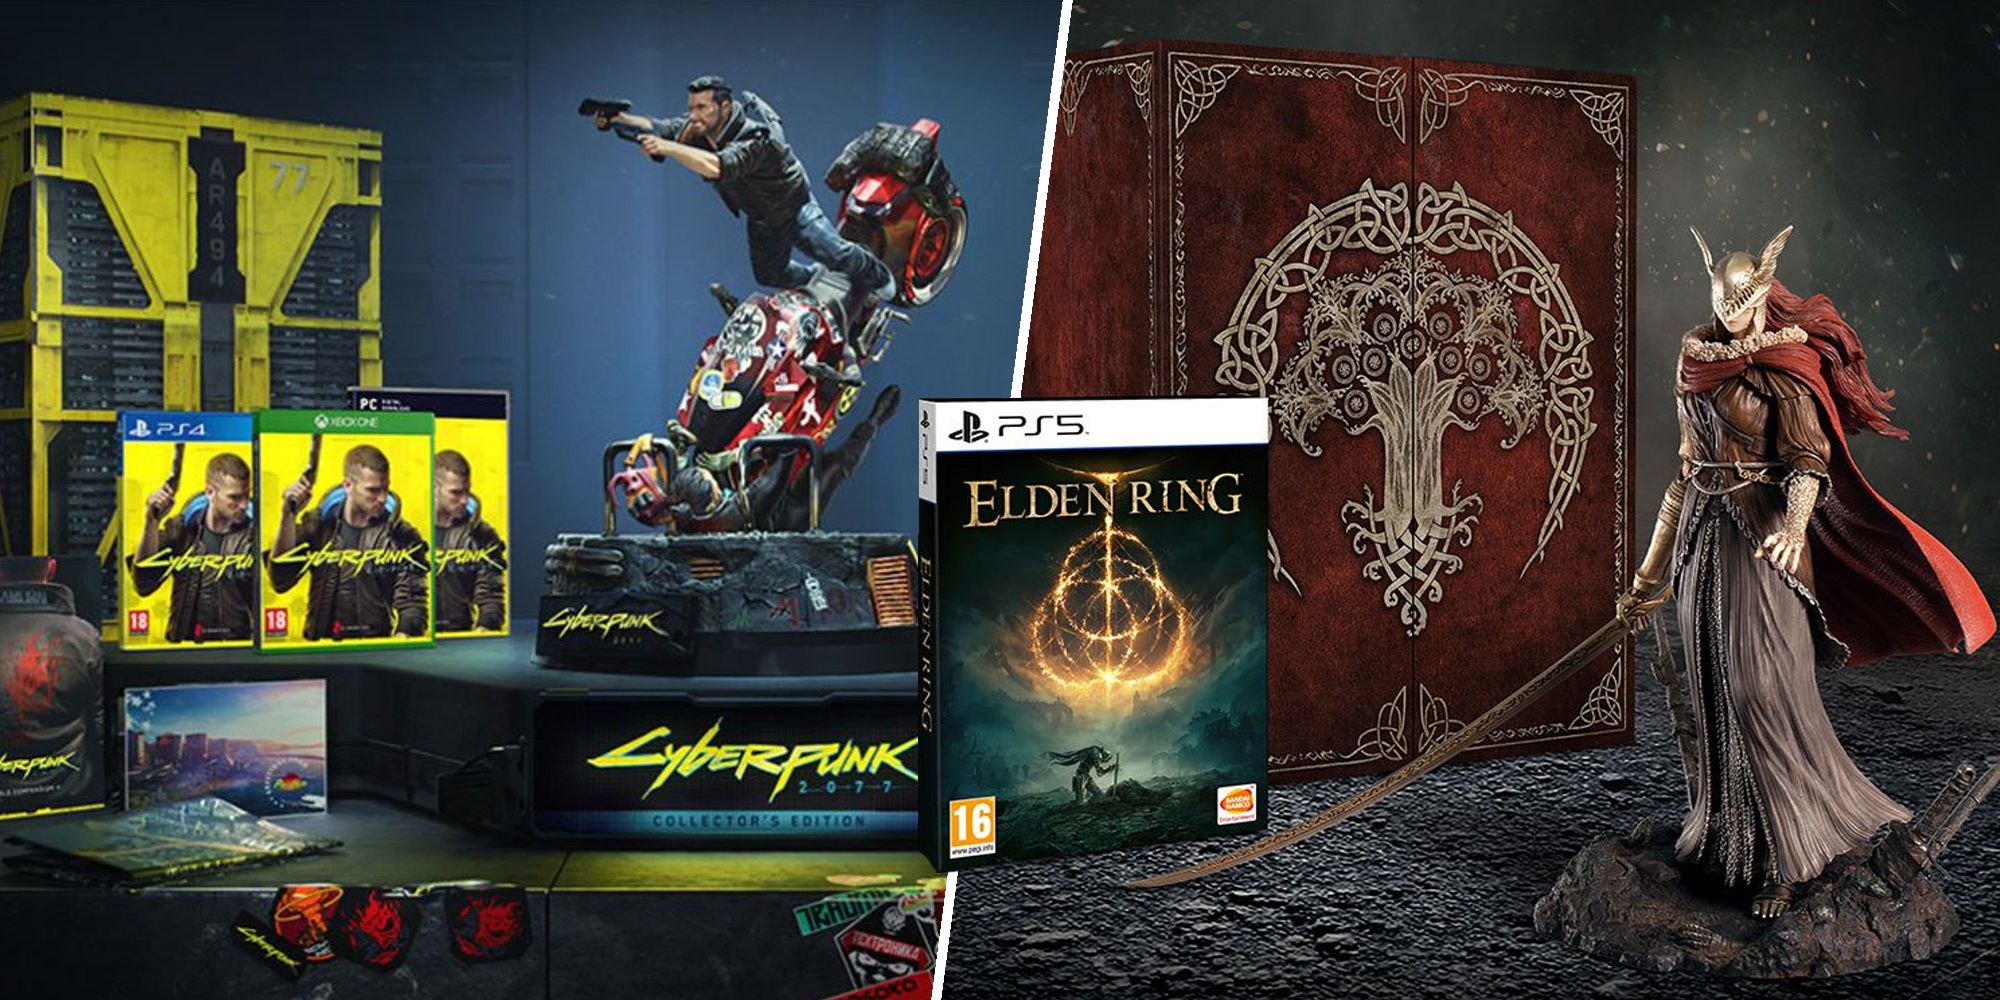 Collector's editions of Cyberpunk 2077 and Elden Ring